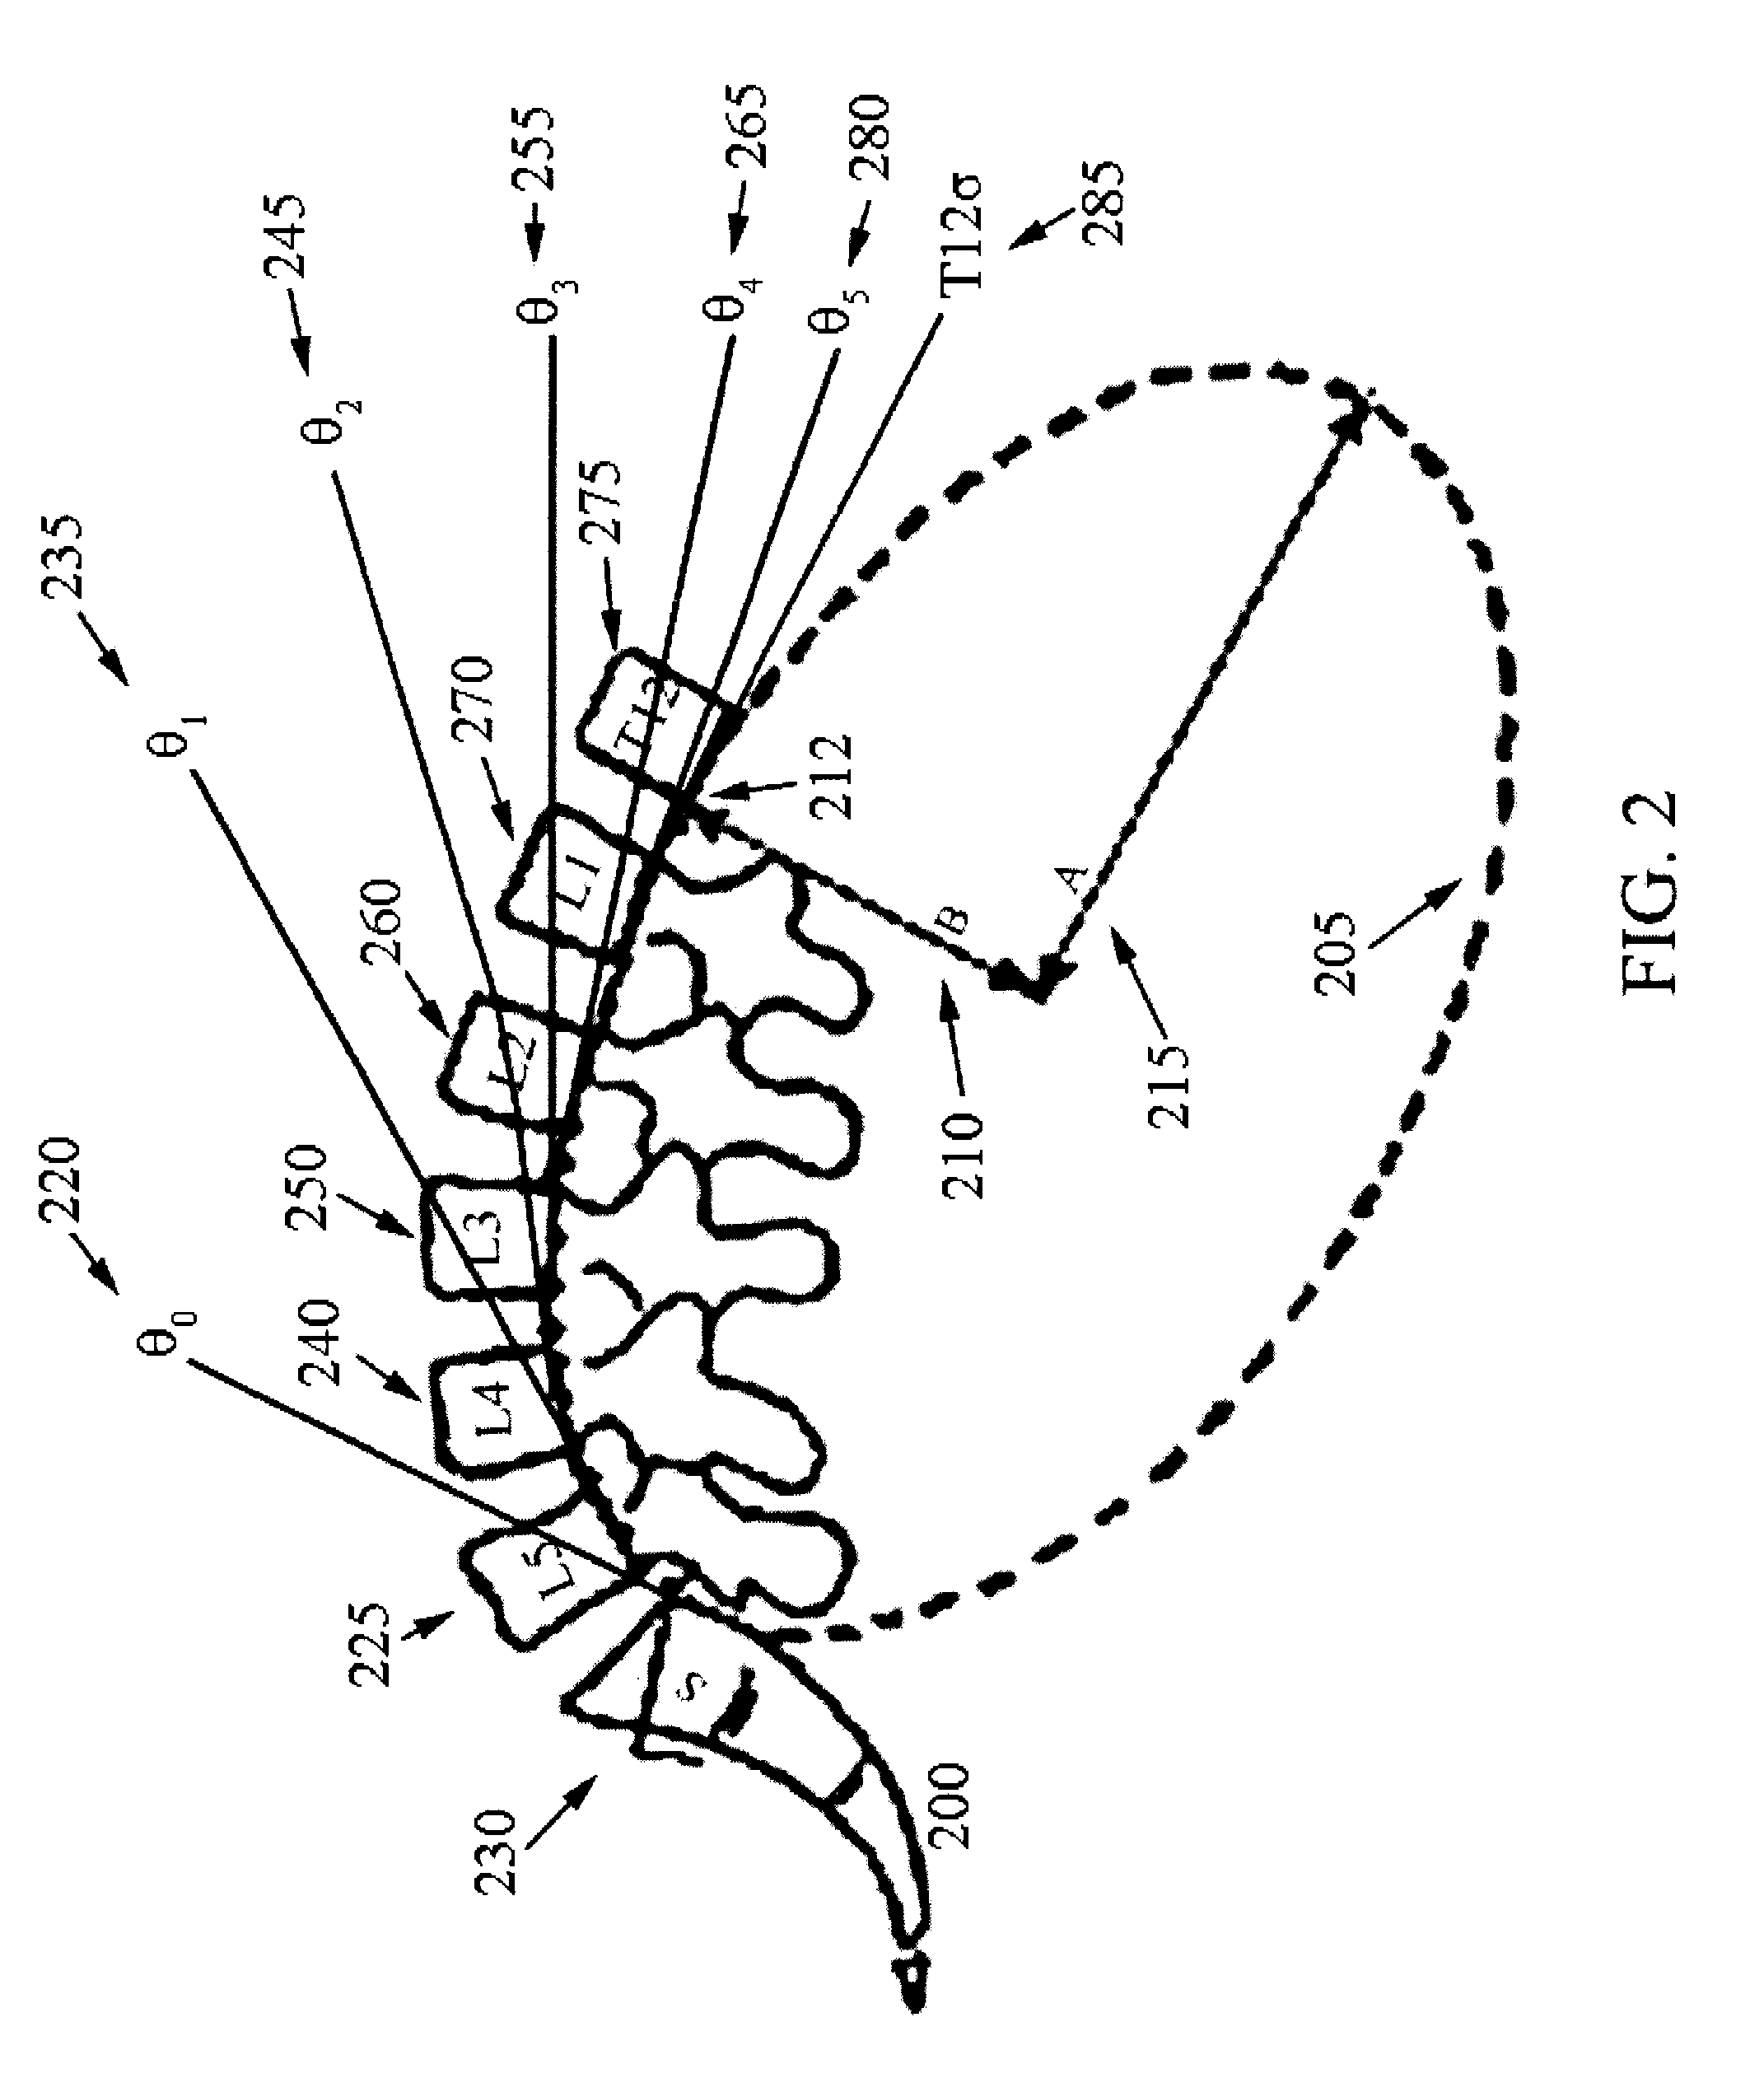 System for dynamically adjusting treatment angle under tension to accommodate variations in spinal morphology